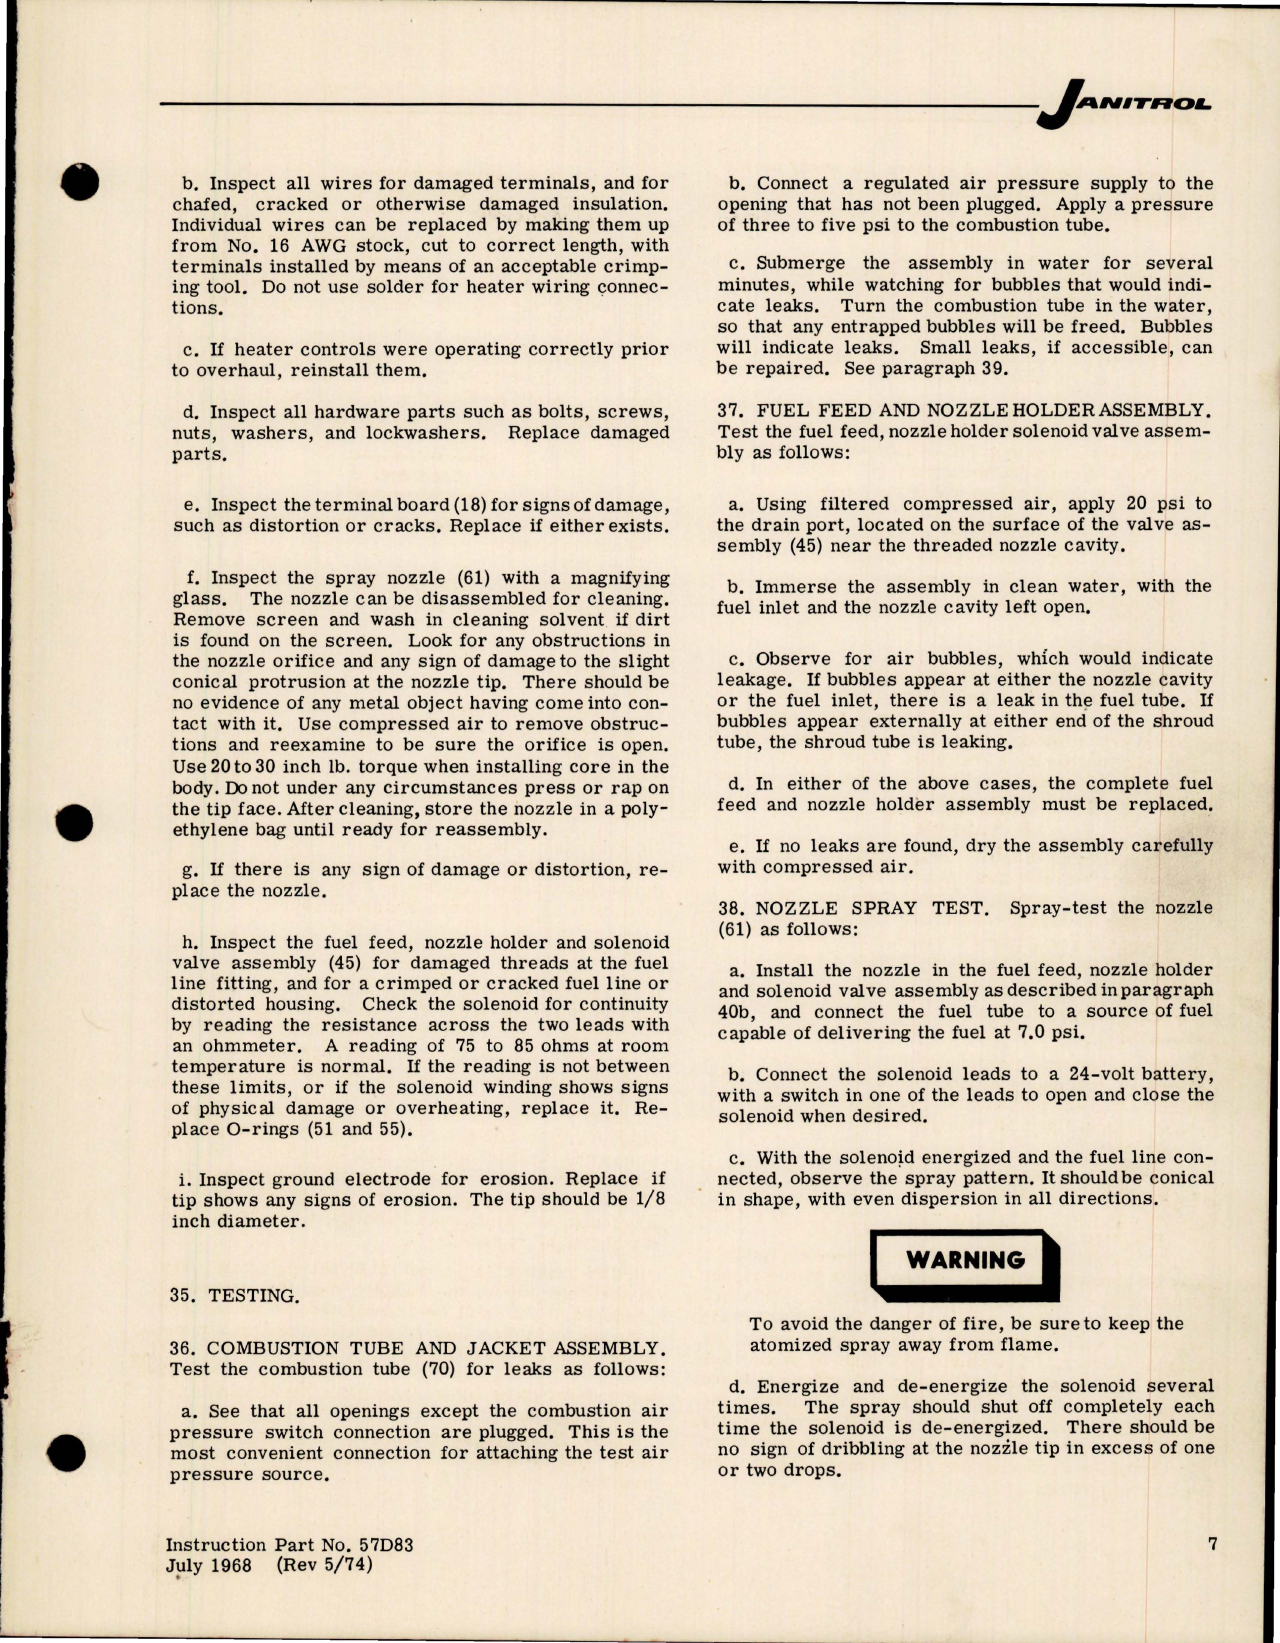 Sample page 7 from AirCorps Library document: Maintenance Instructions for Aircraft Heater Assembly - Part A34D51 - B3040